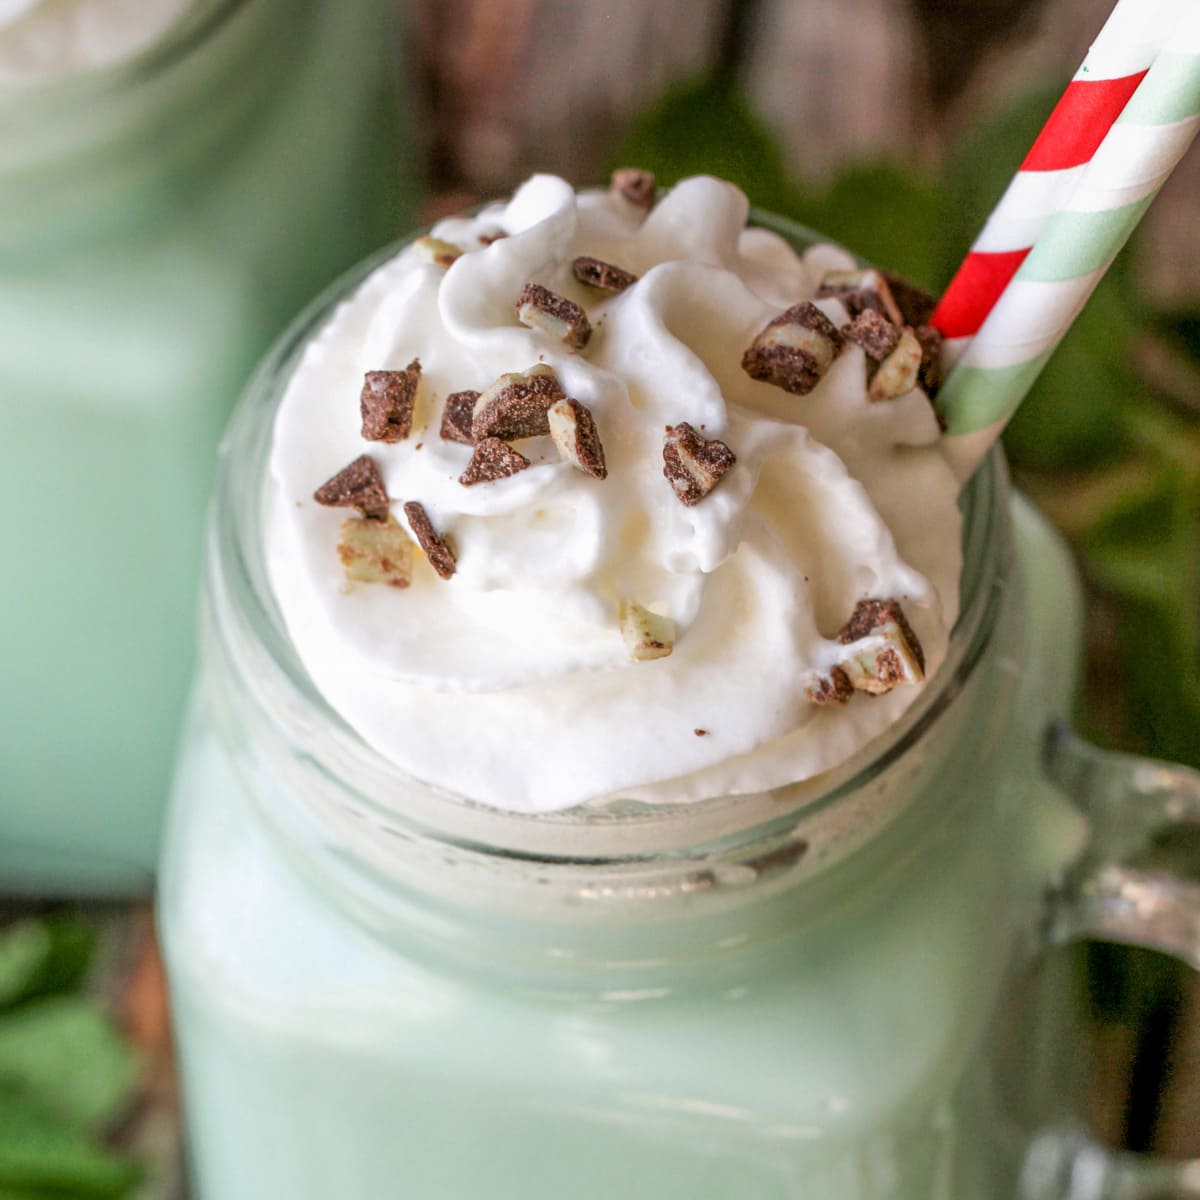 Whipped cream and Andes mints pieces on top of mint hot chocolate.